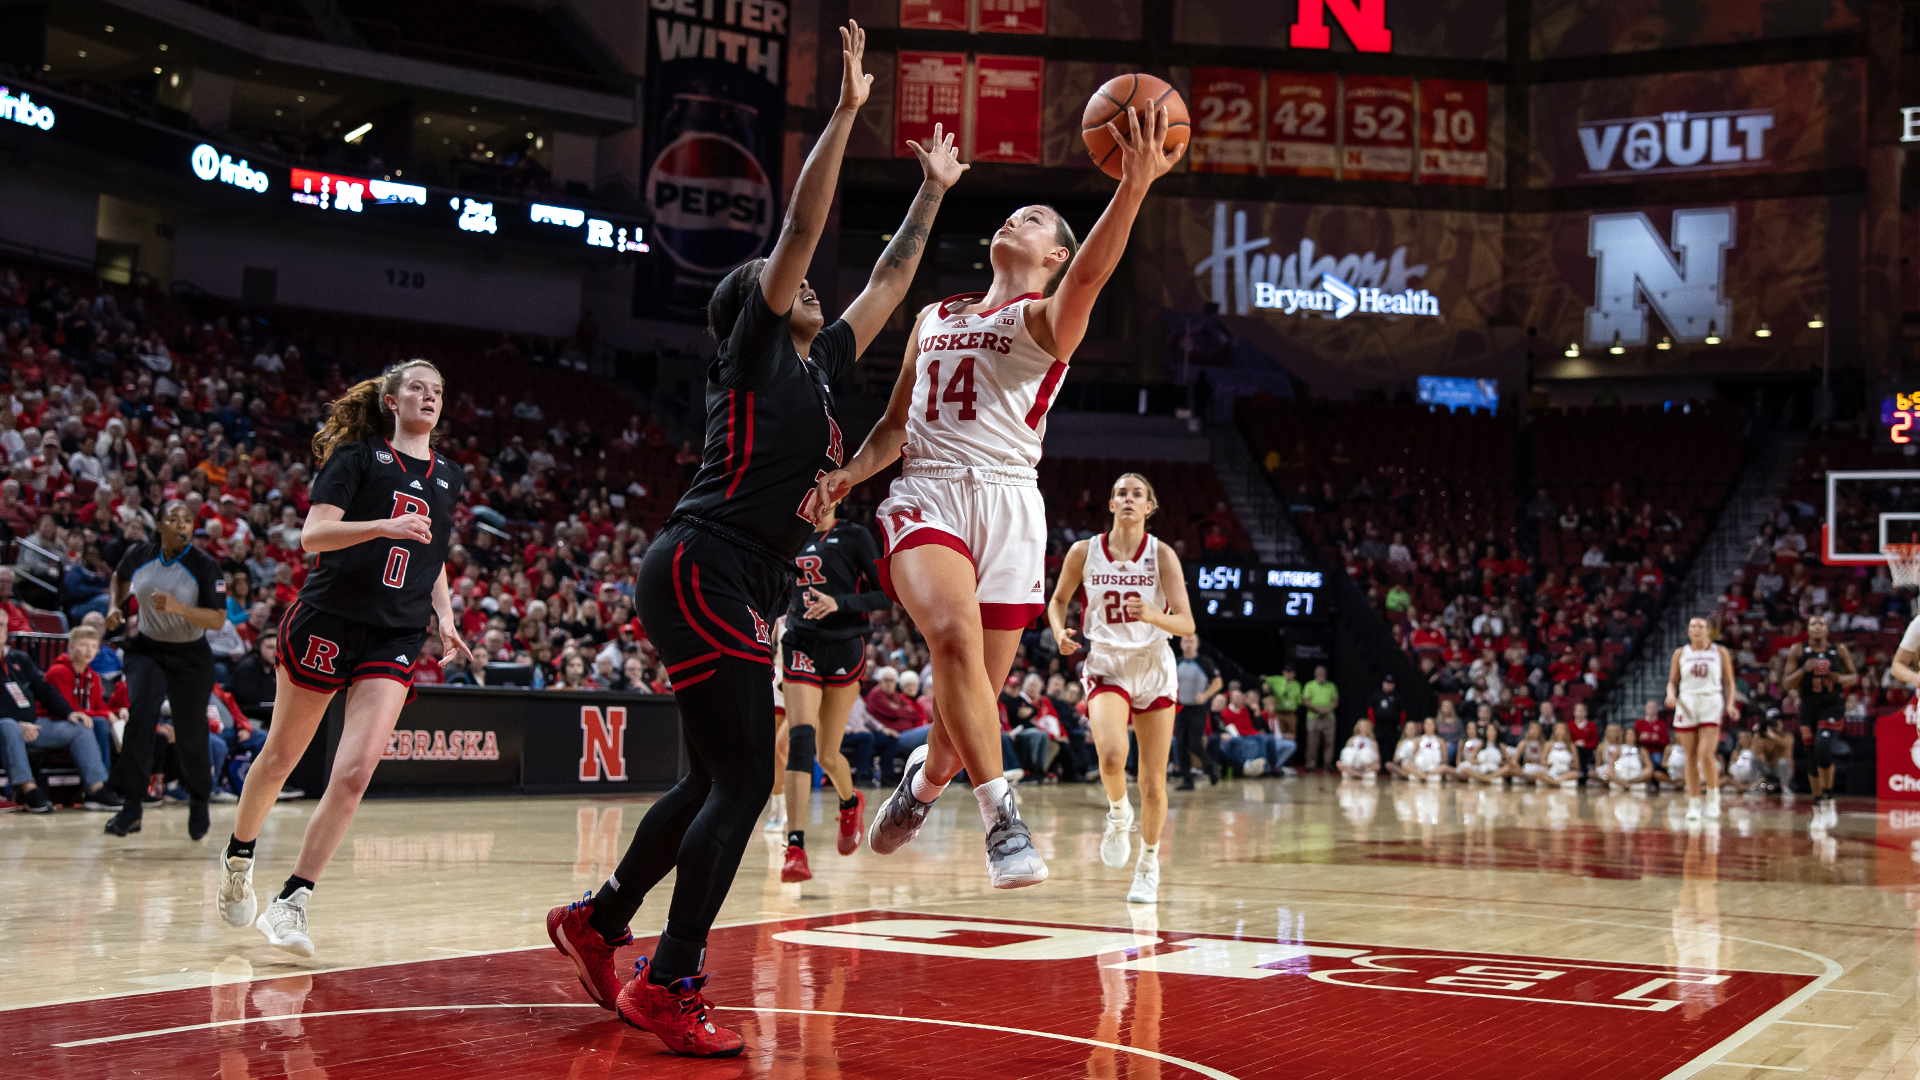 Nebraska sophomore guard Callin Hake scores on a layup after making a steal during the second quarter against Rutgers.